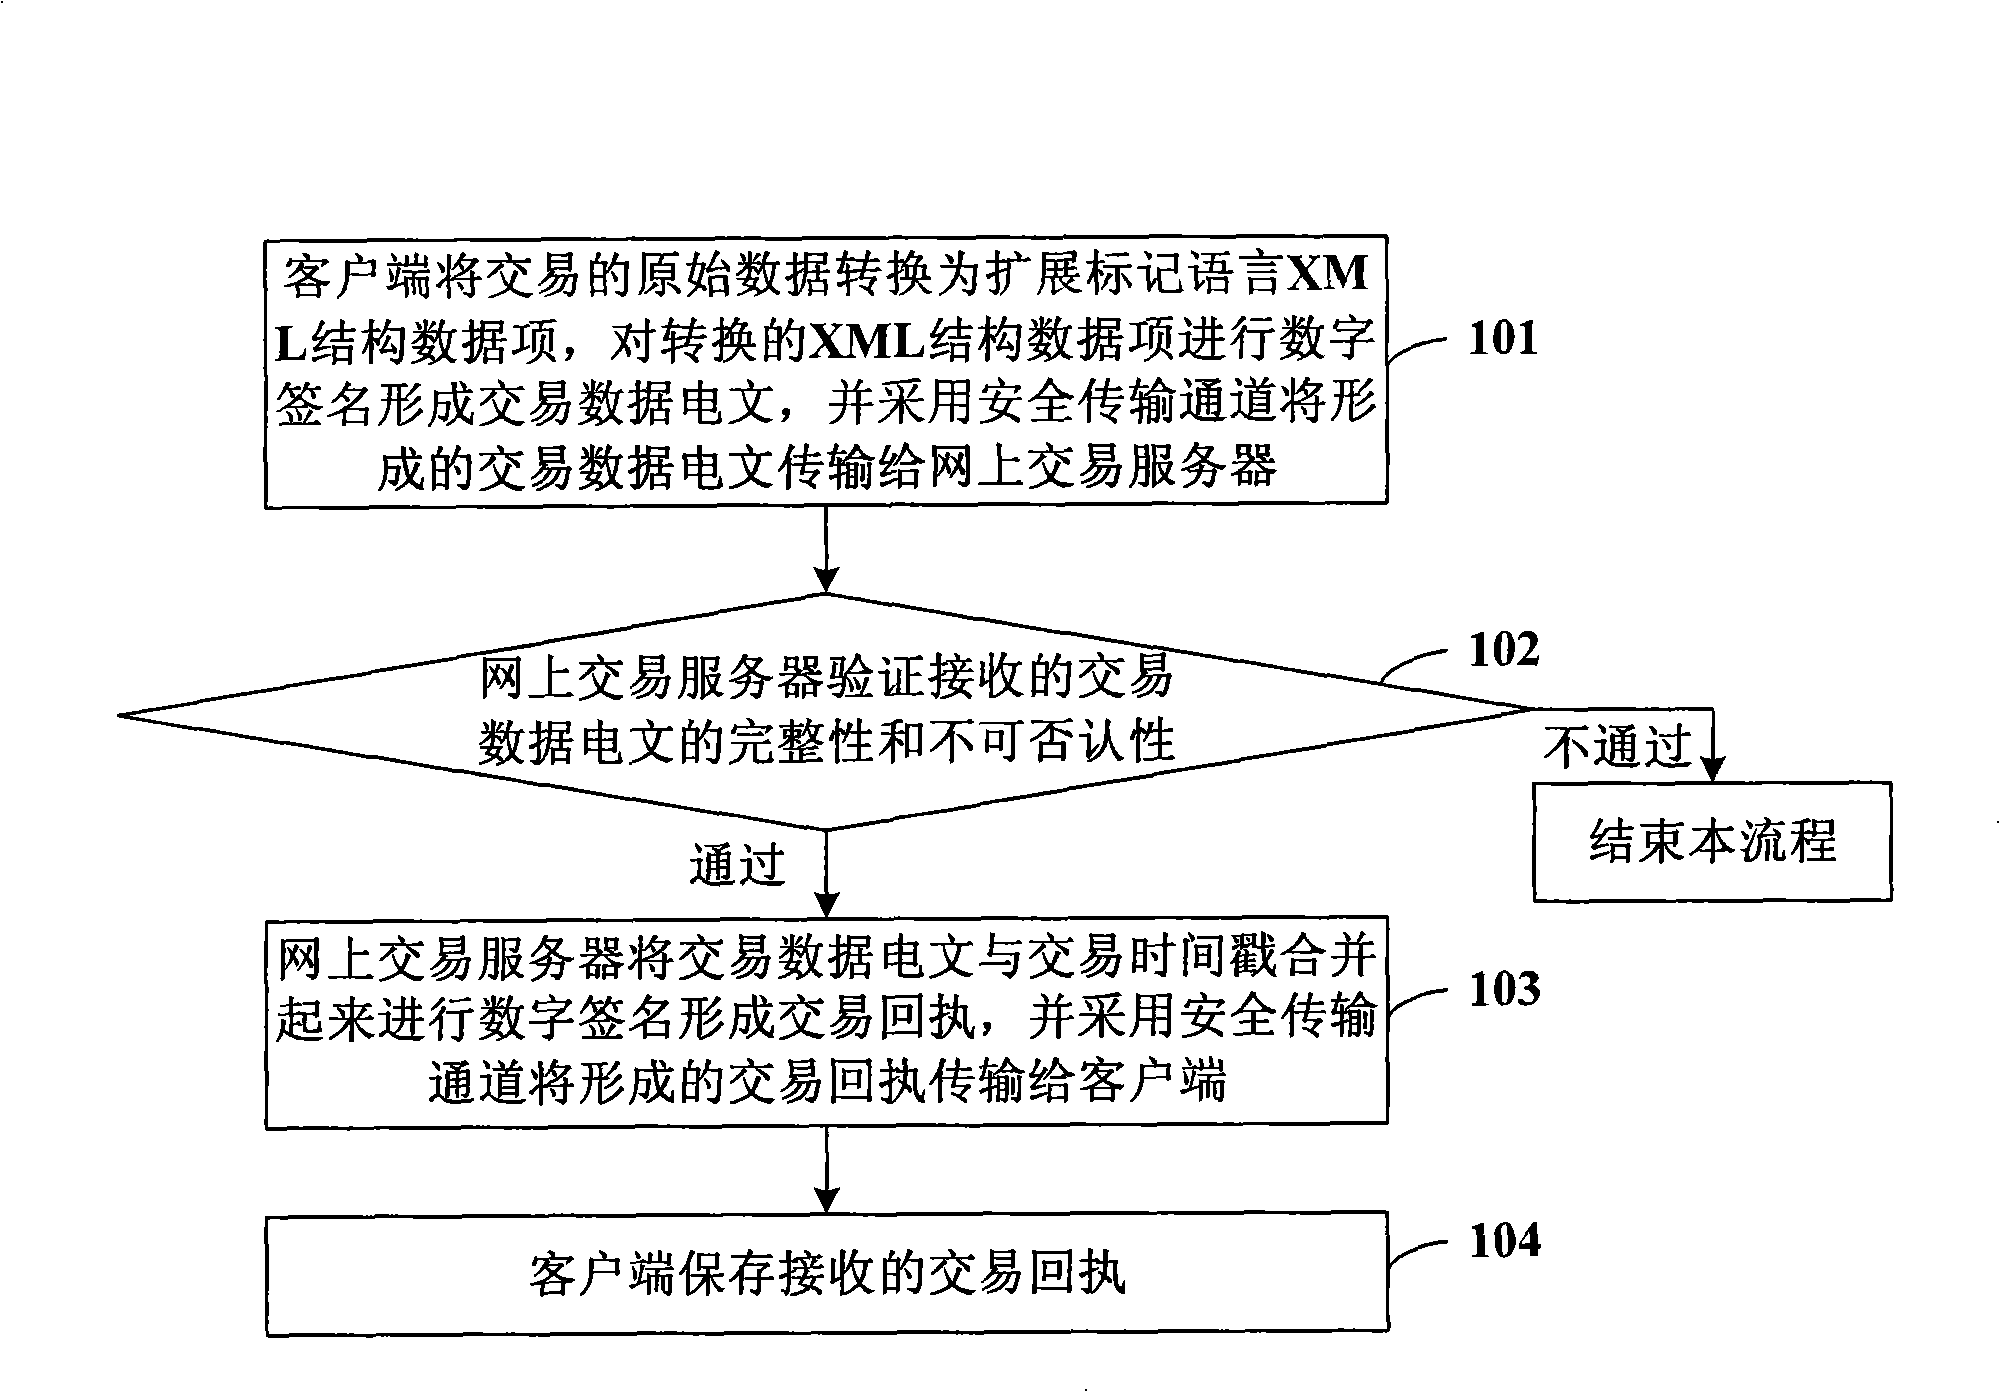 Method for implementing network transaction data text